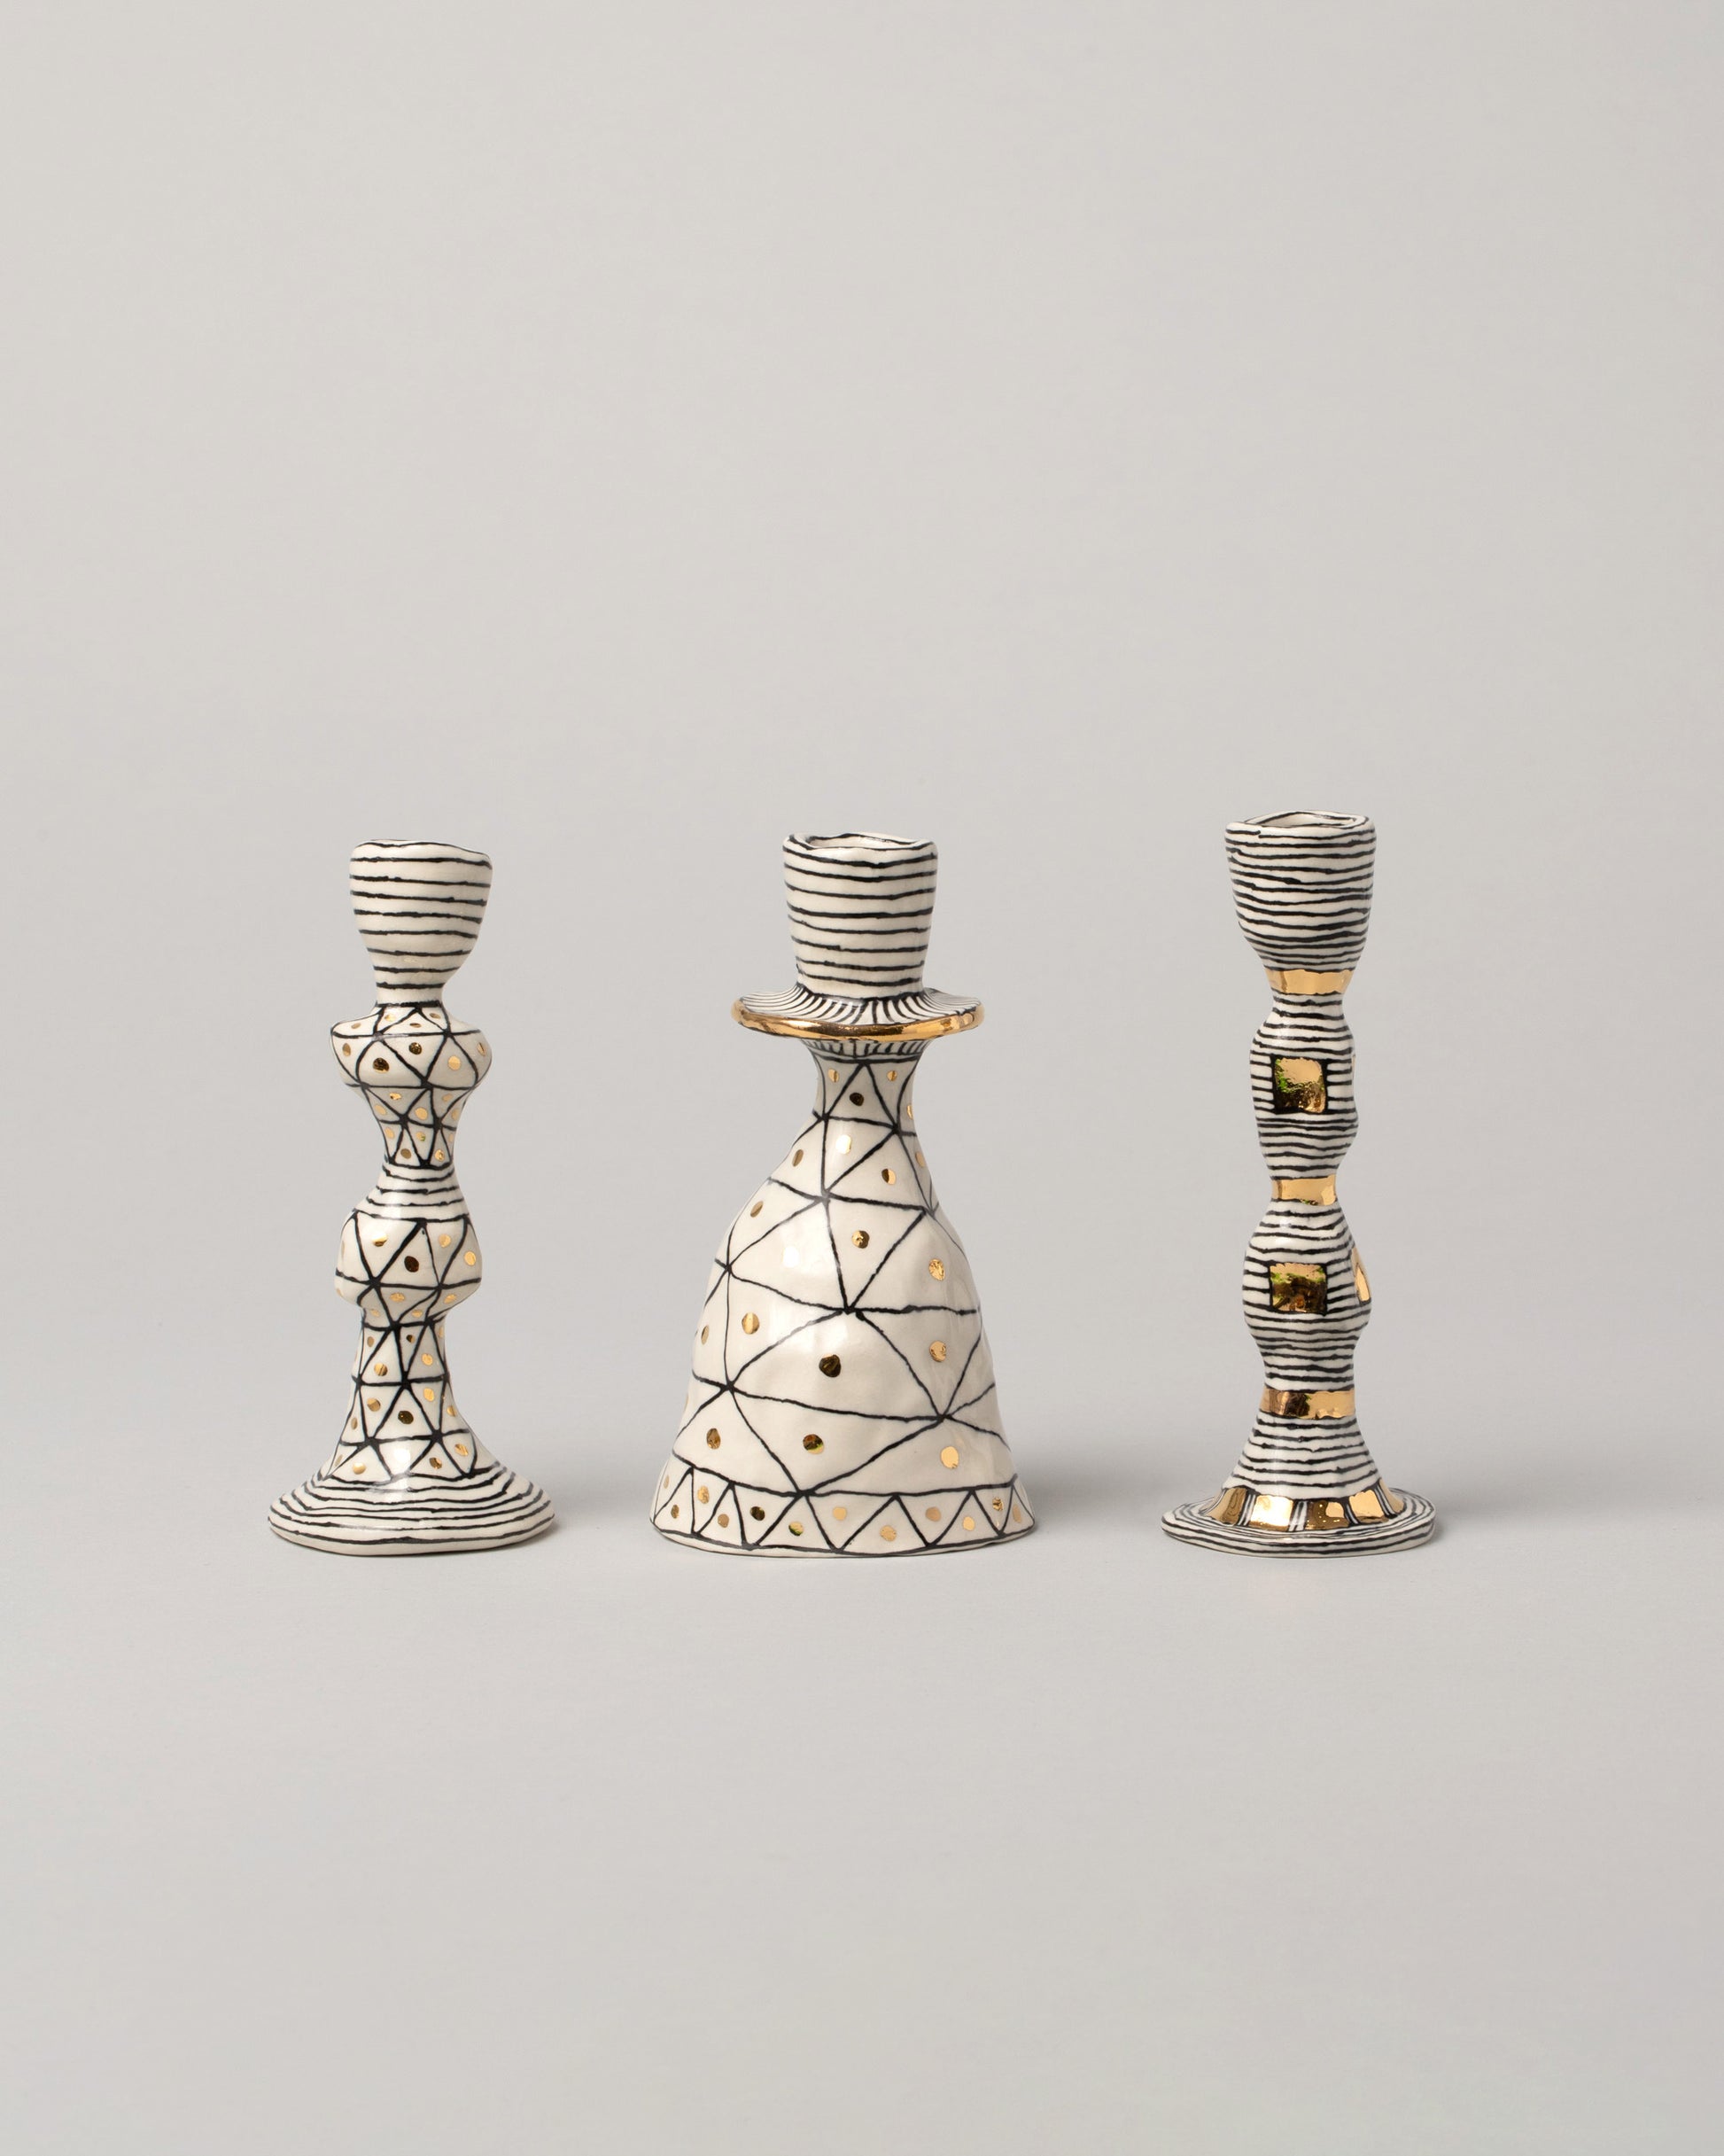 Group of Suzanne Sullivan Candleholders on light color background.